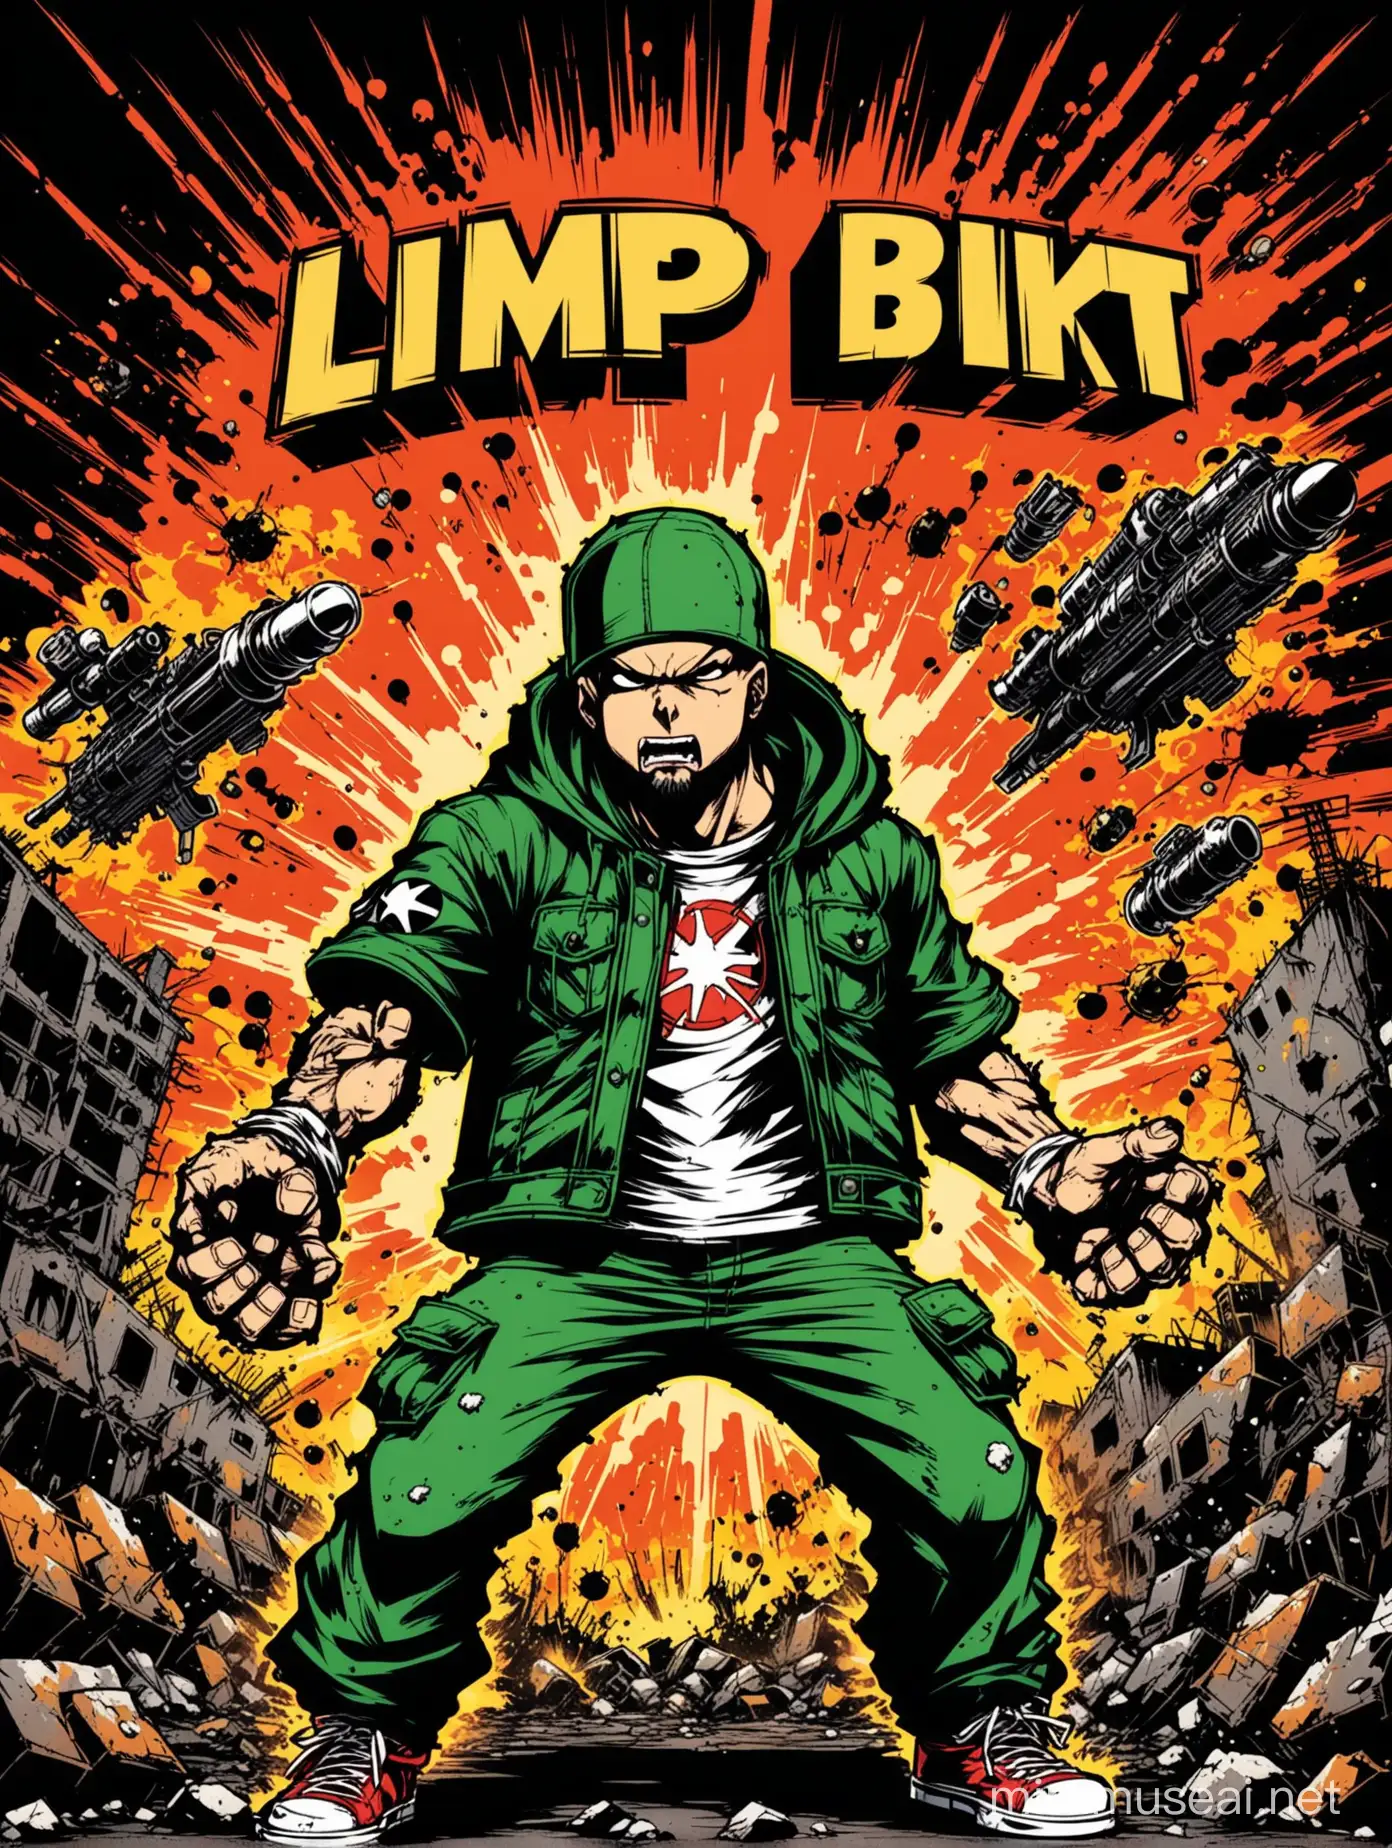 limp bizkit type character with explosion in the background, post apocalyptic background, in the style of greg capullo, in the style of todd mcfarlane, american comics style, graffiti style, 90s art style, black background